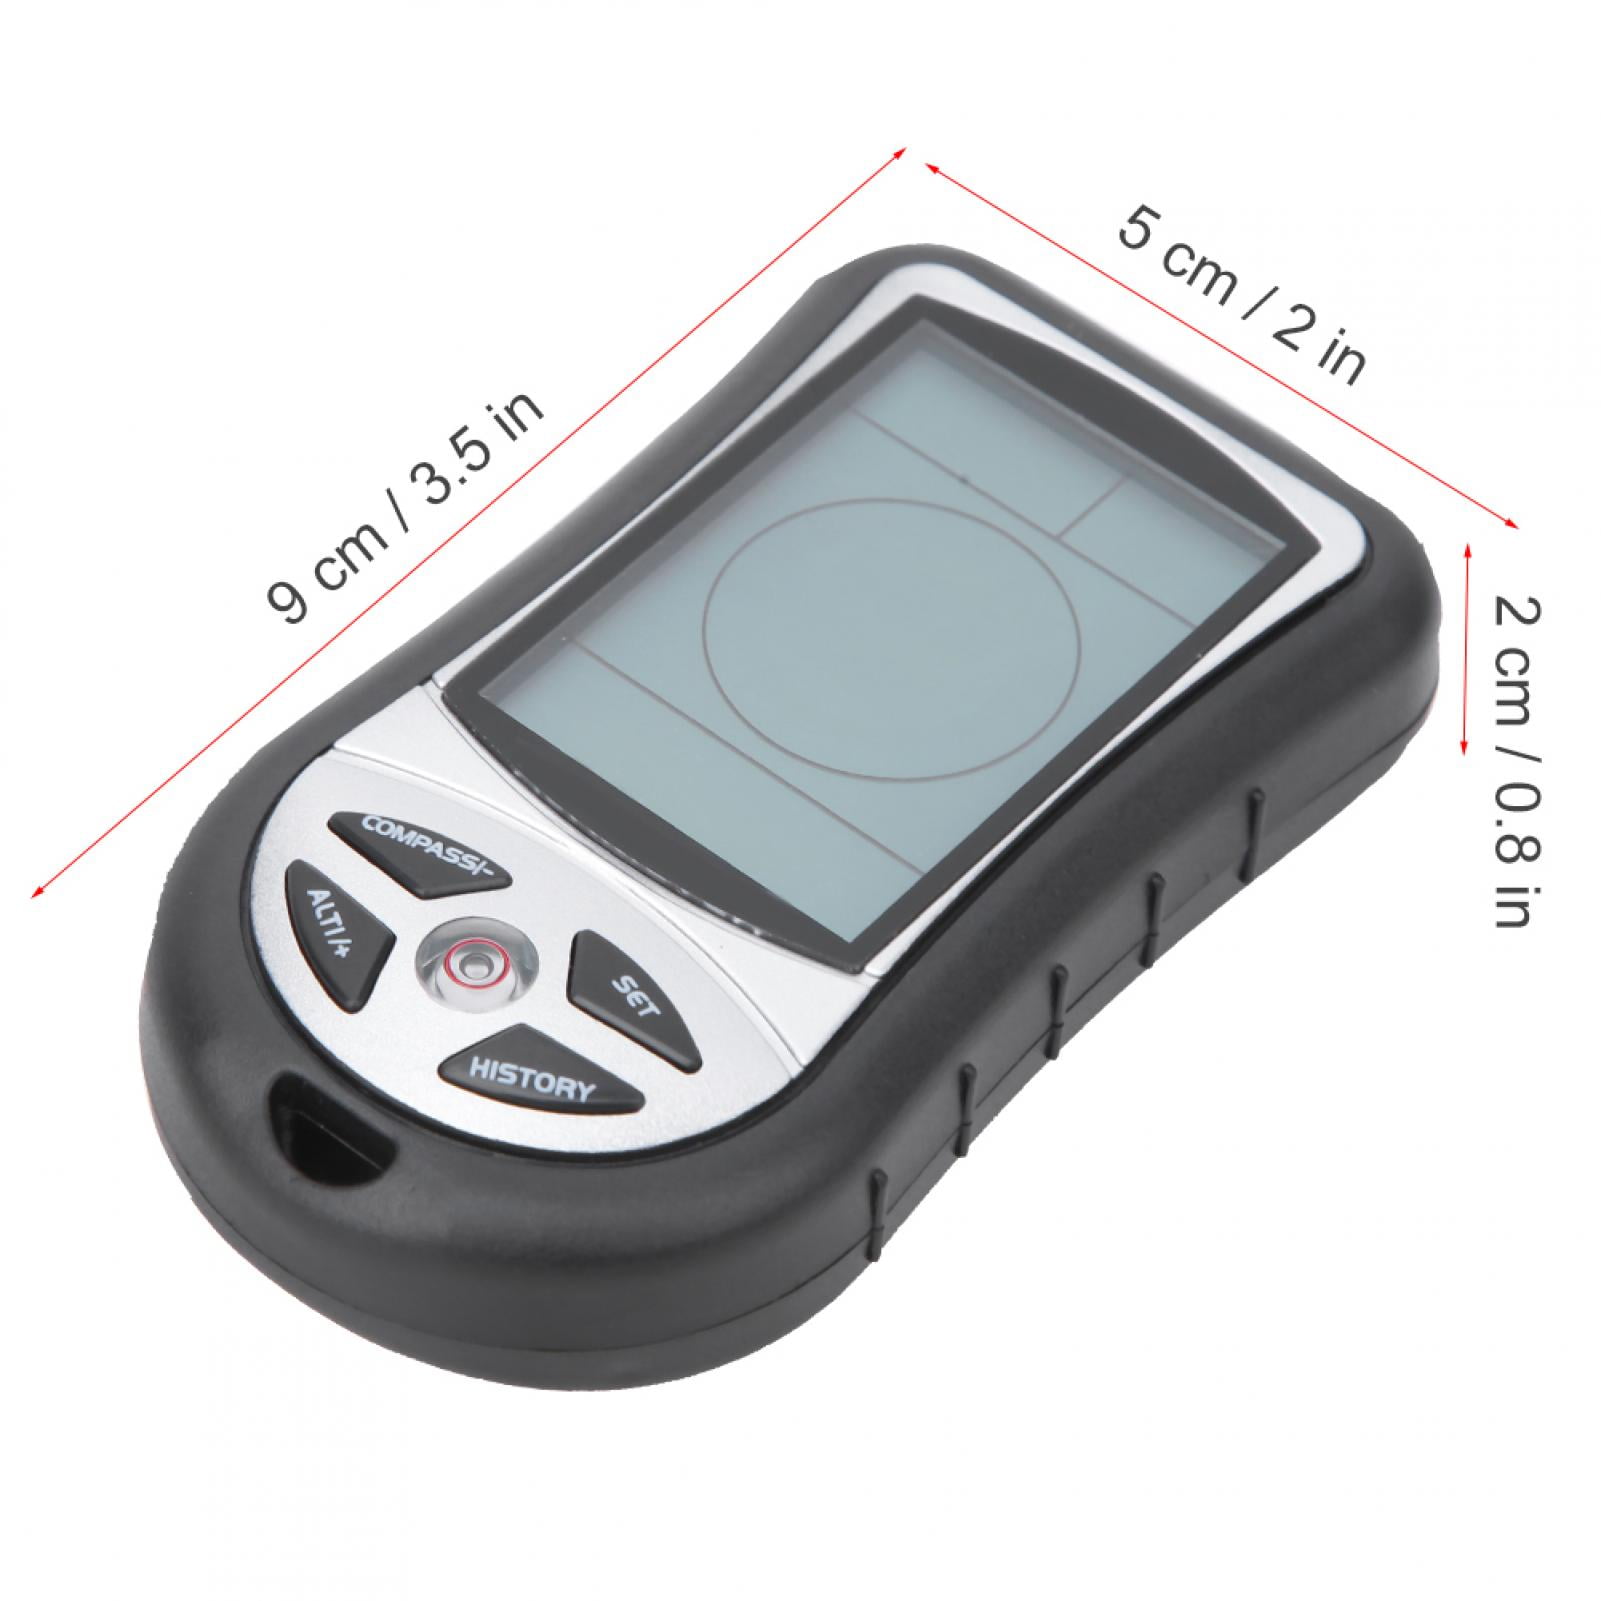 8 in 1 Multifunction Digital LCD Compass Barometer Thermometer for Outdoor Use